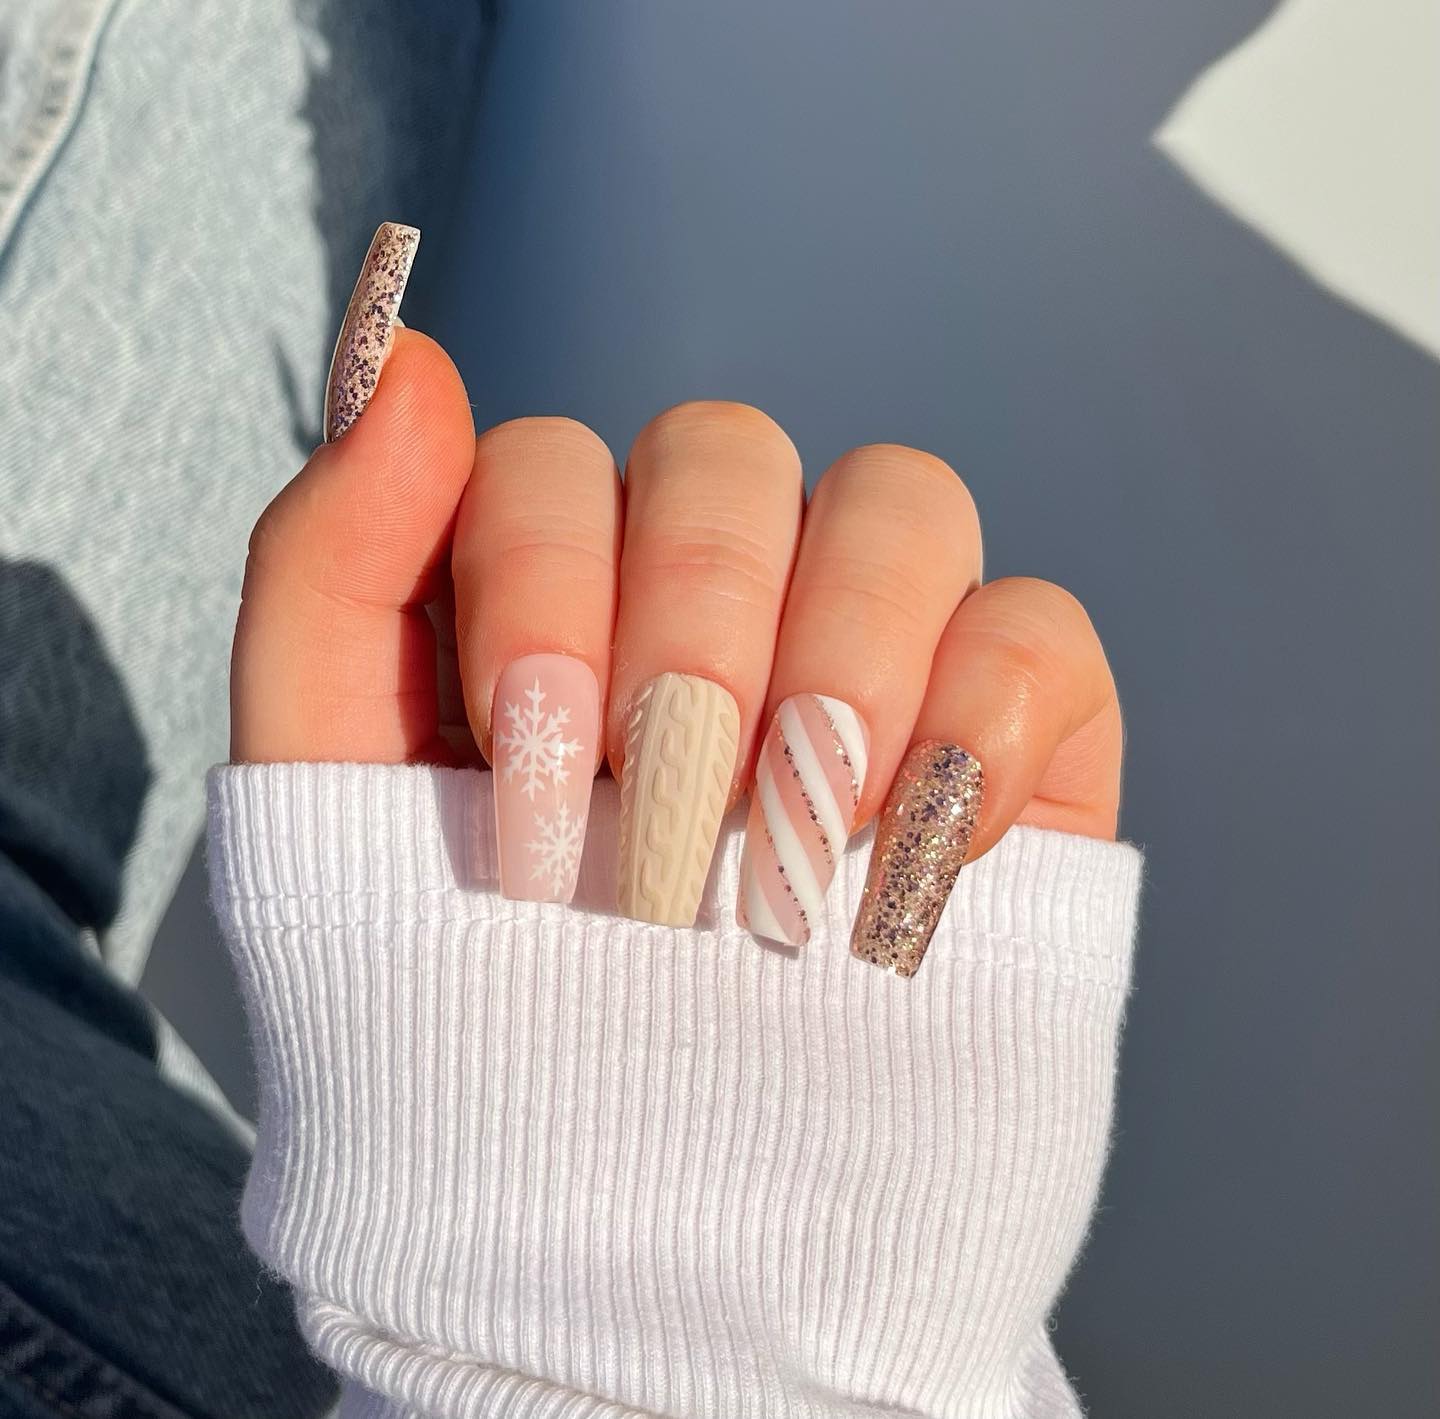 Not Keen on Color? Check These 25+ Pretty Nude and White Christmas Nails -  Nail Designs Daily